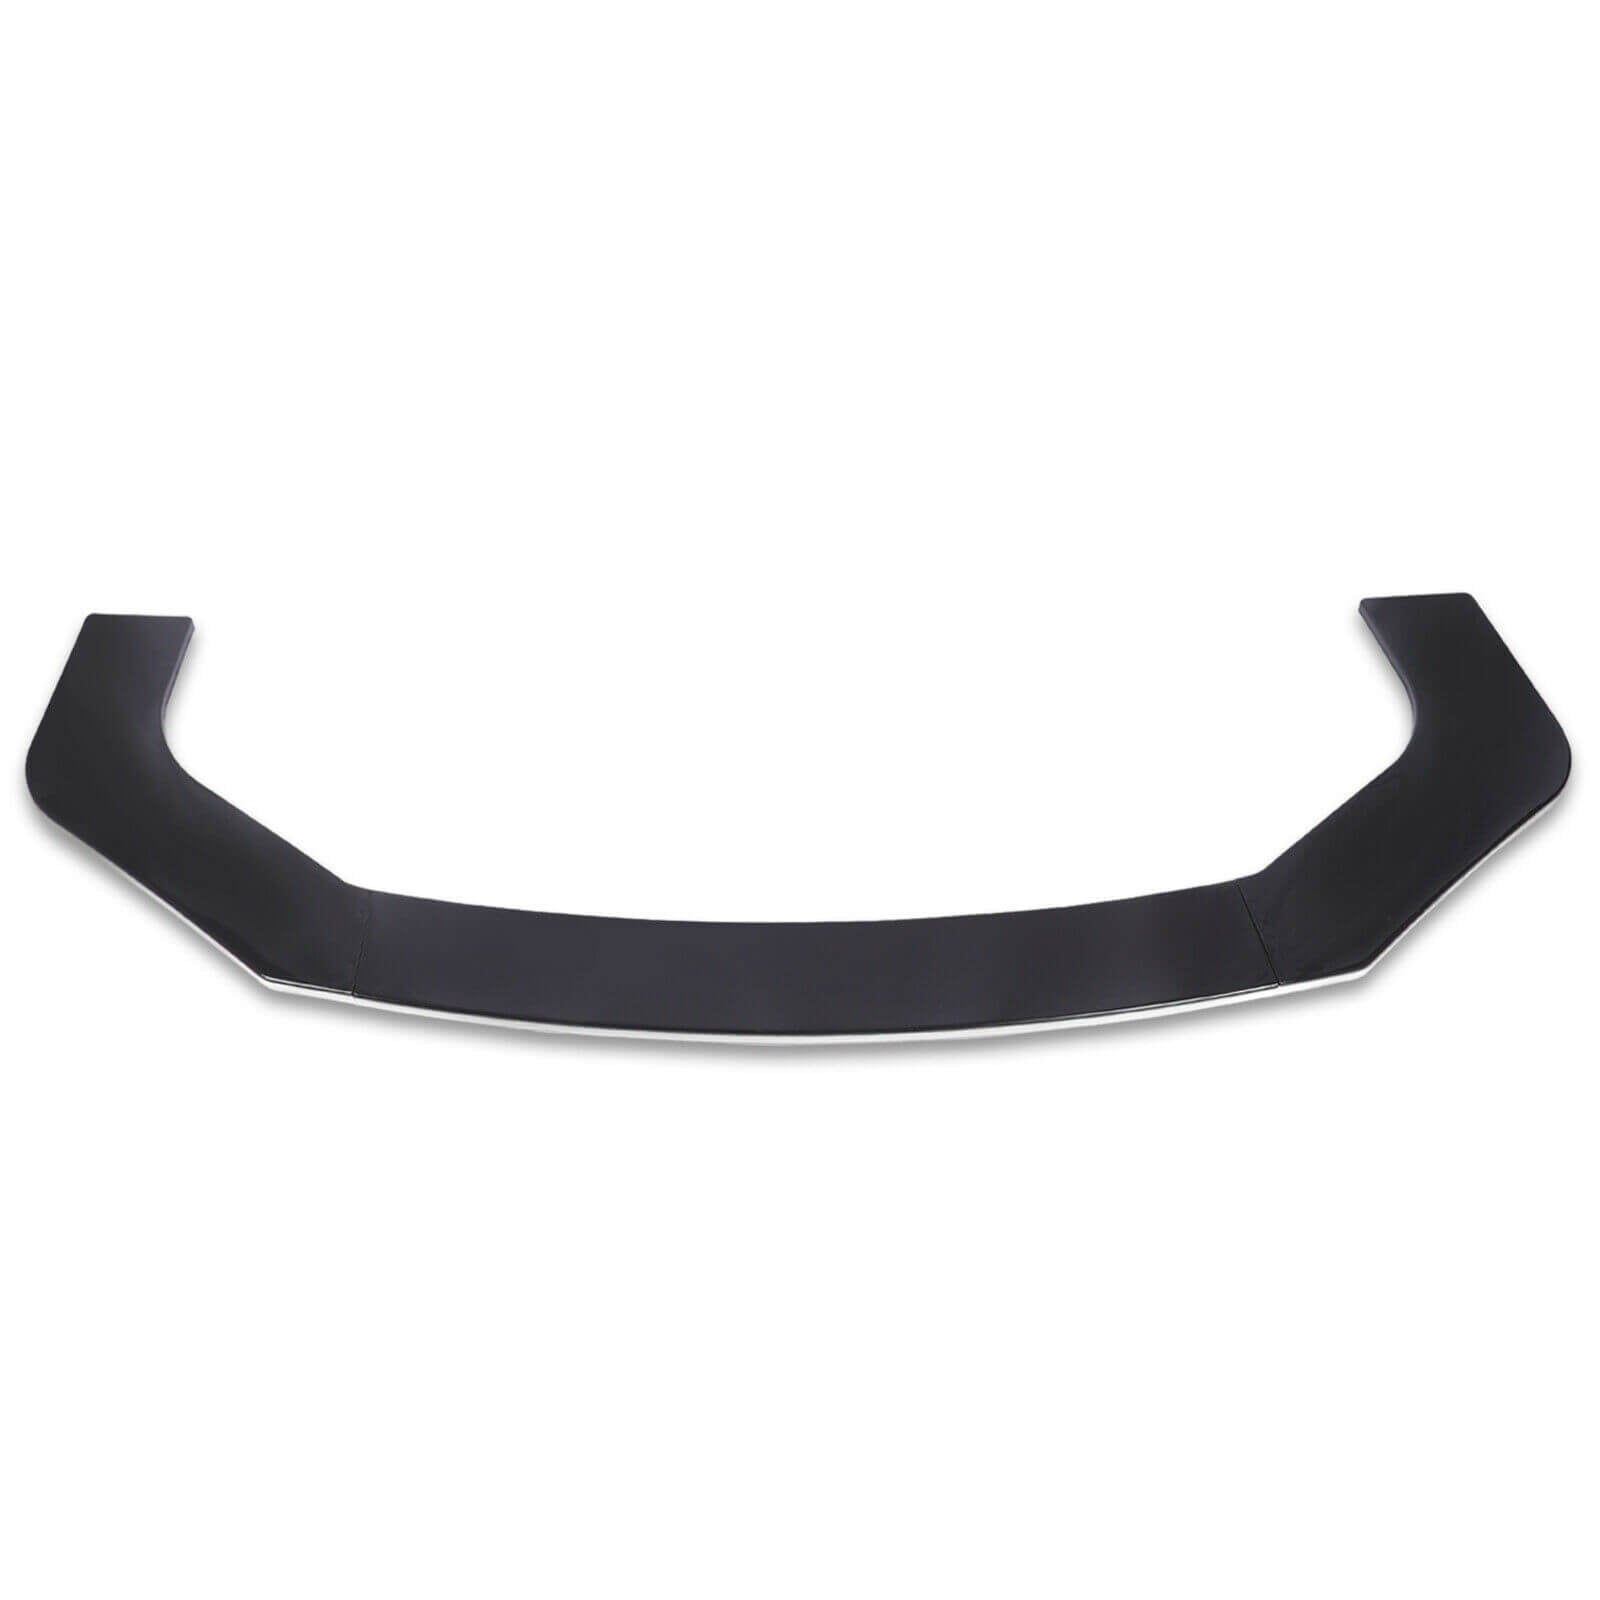 White of 71" Universal Front Bumper Lip Trim to Fit